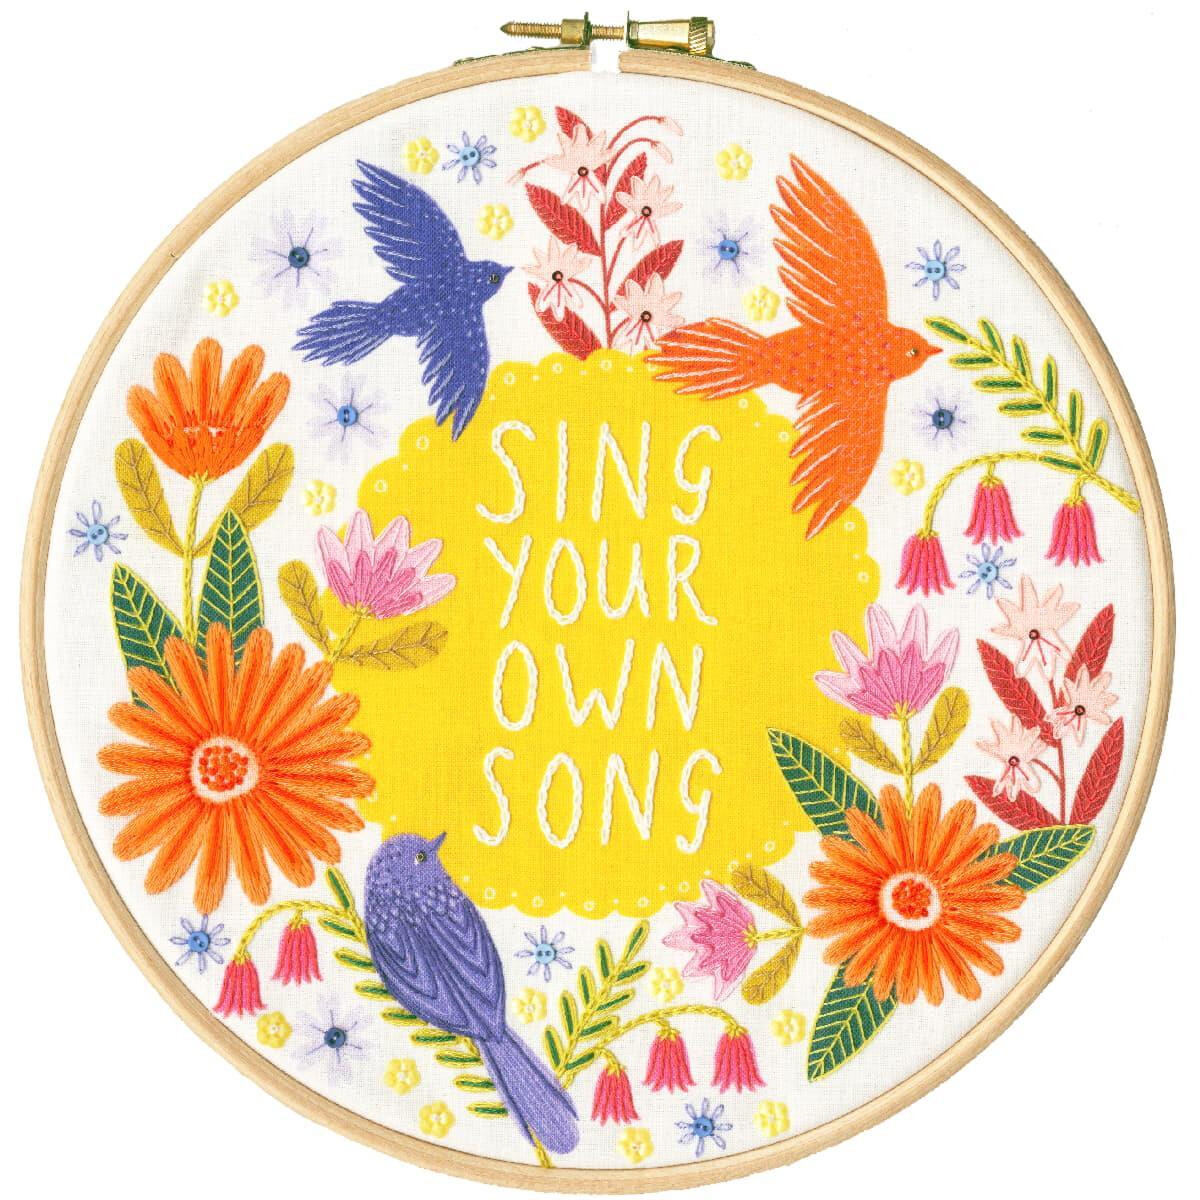 An embroidery hoop shows a lively design with colorful...